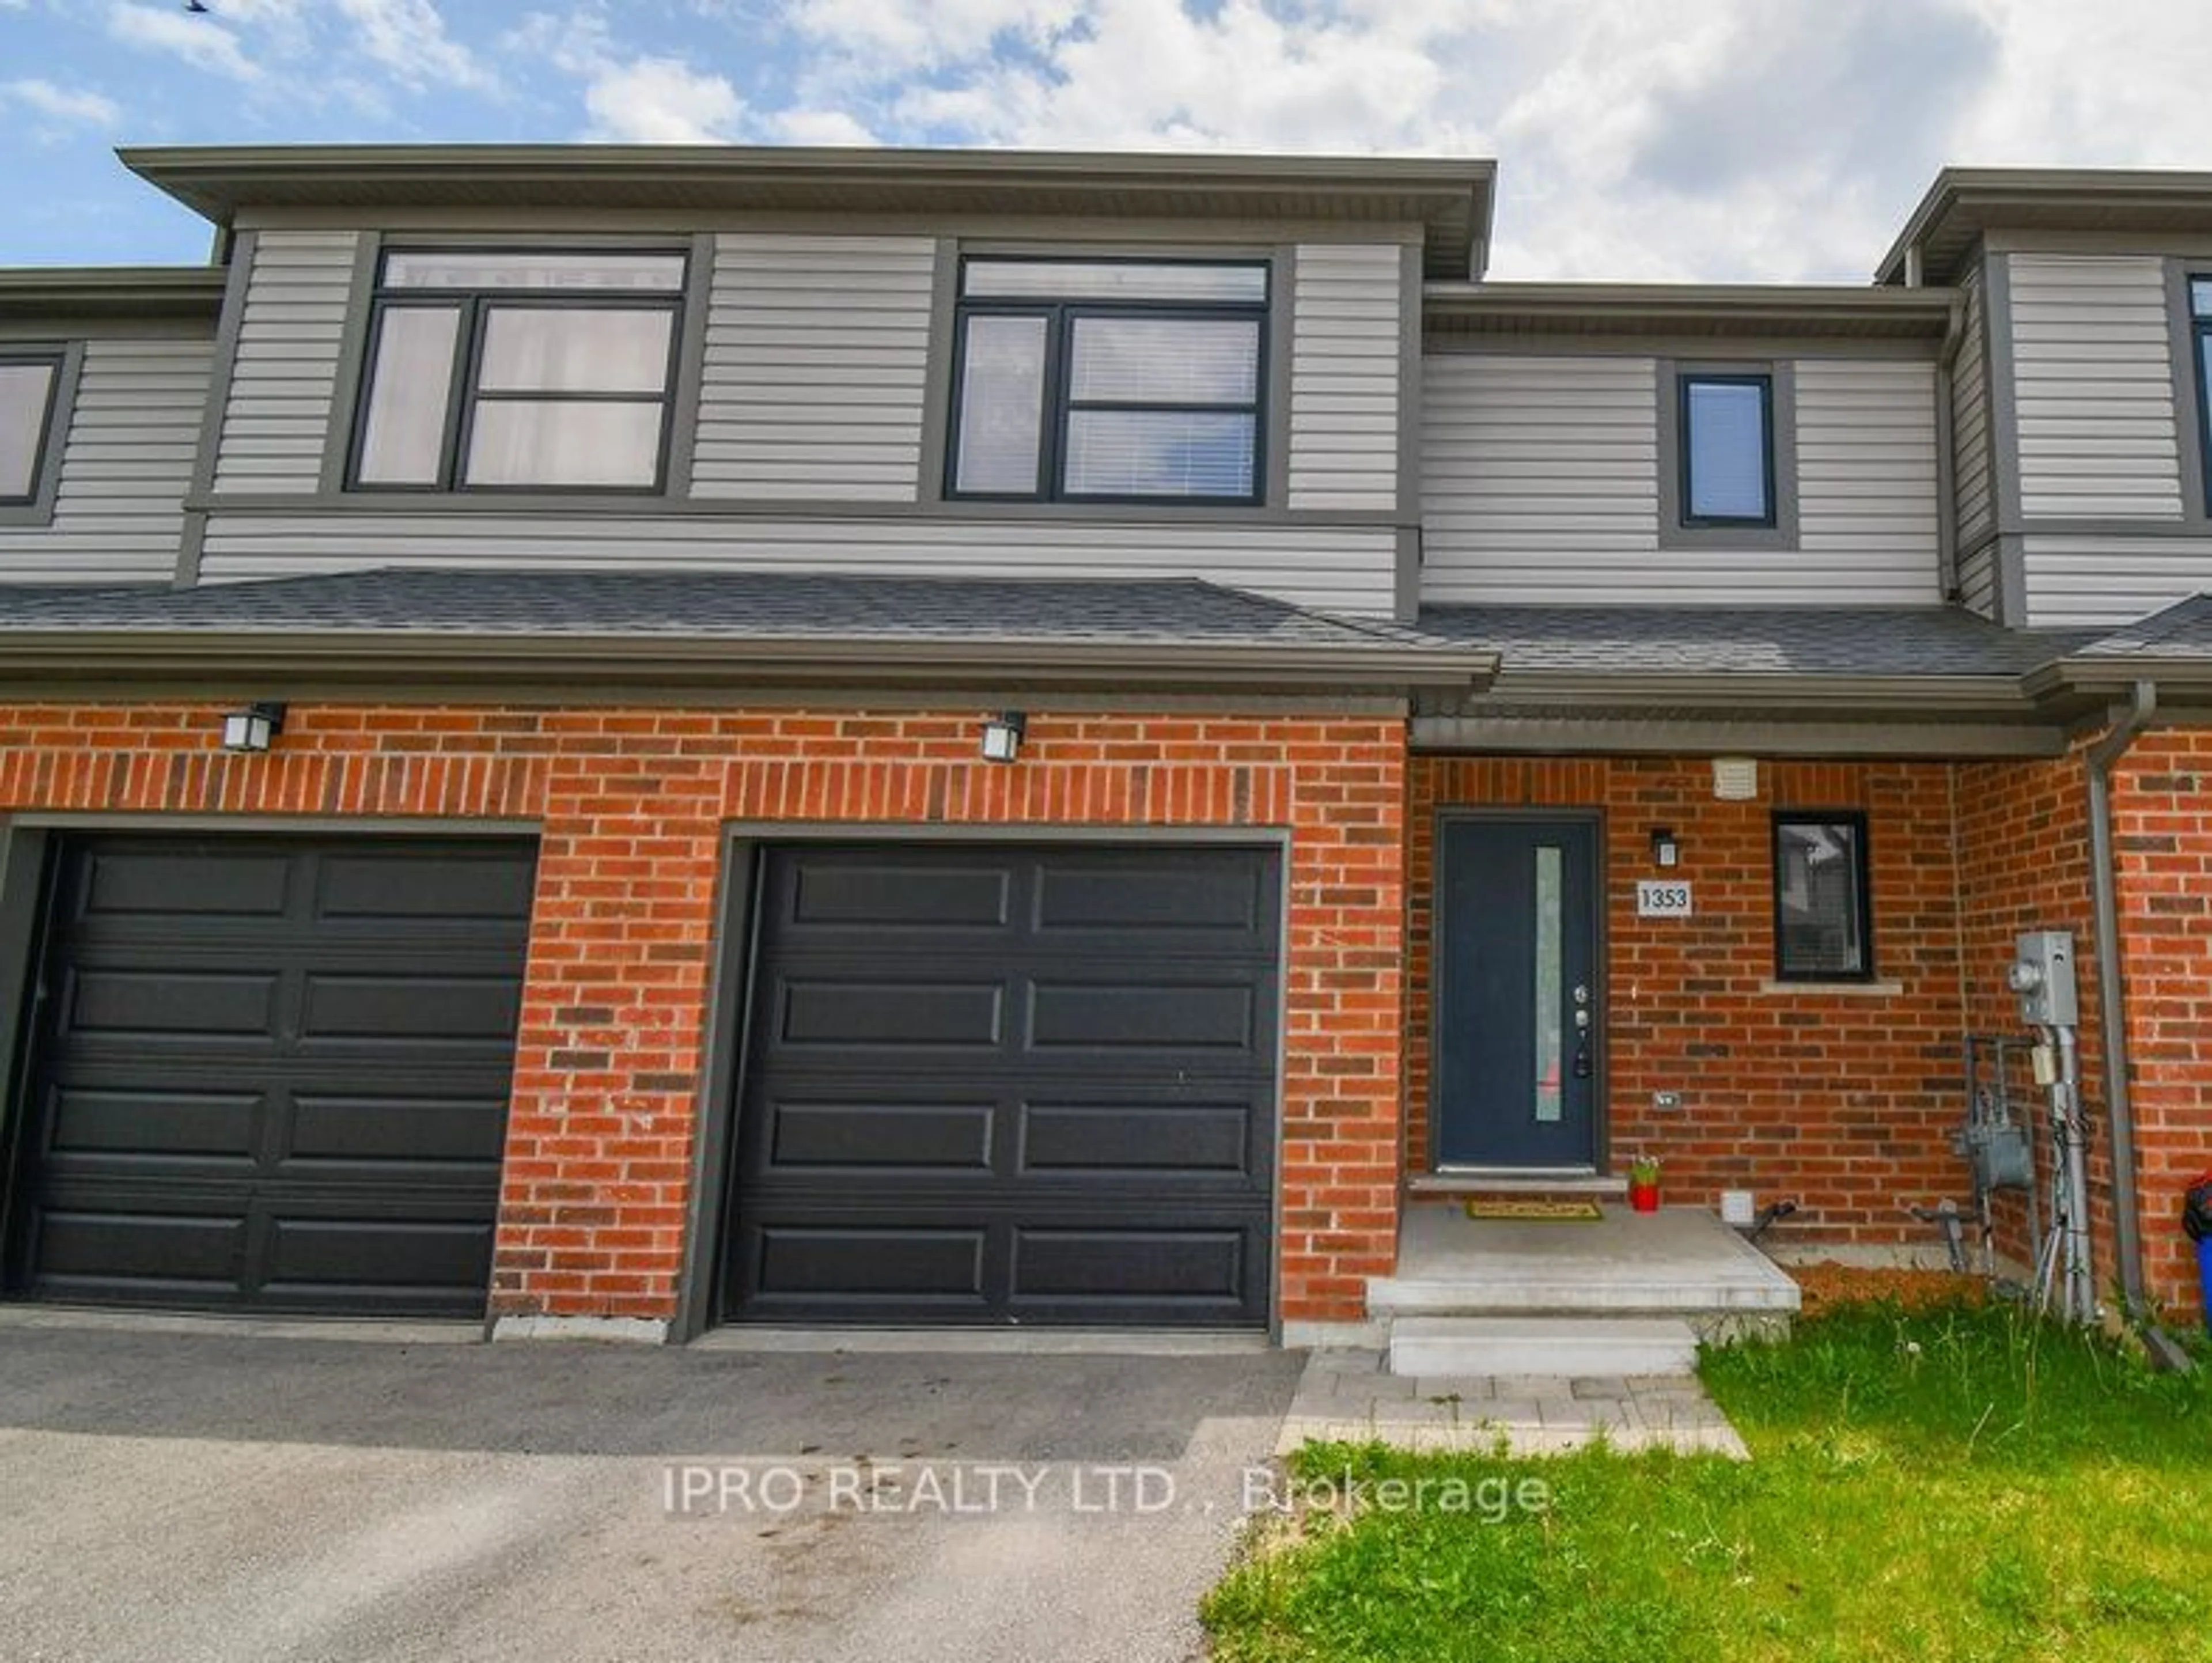 Home with brick exterior material for 1353 Michael Circ, London Ontario N5V 0B8